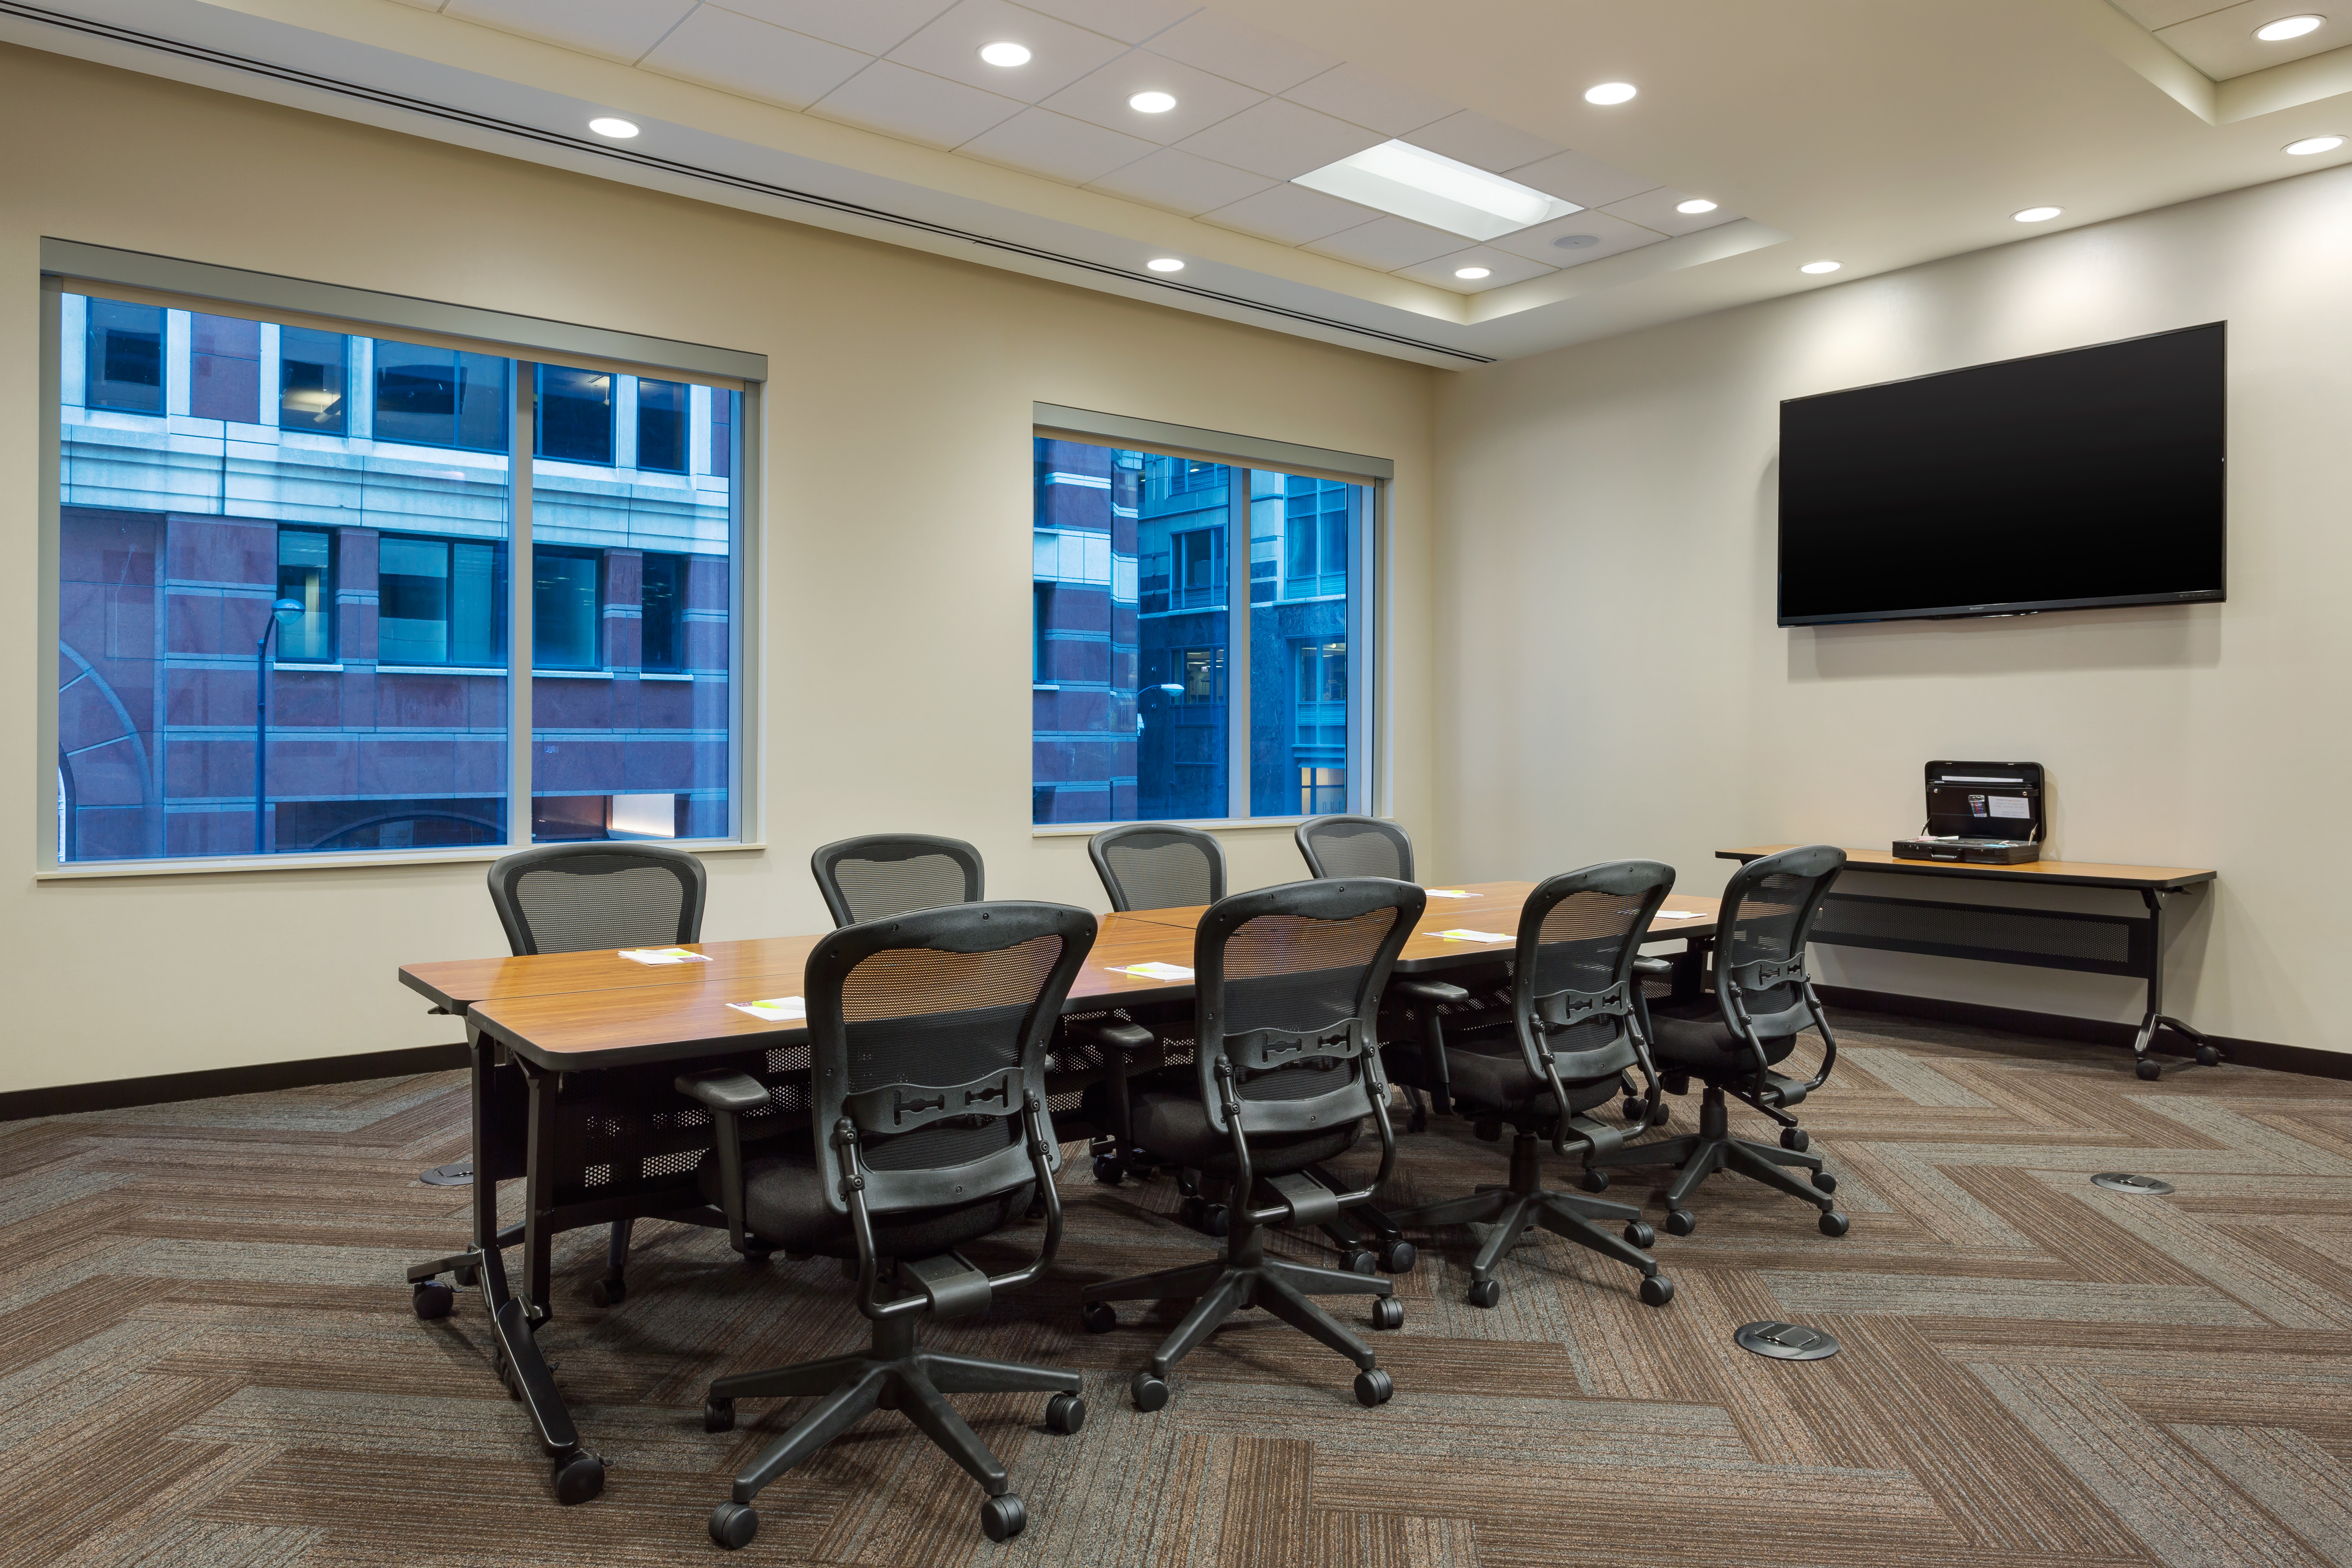 Hyatt Place Chicago/Downtown - The Loop hotel is your ideal venue for small corporate, executive meetings and training classes, or social functions, and receptions.